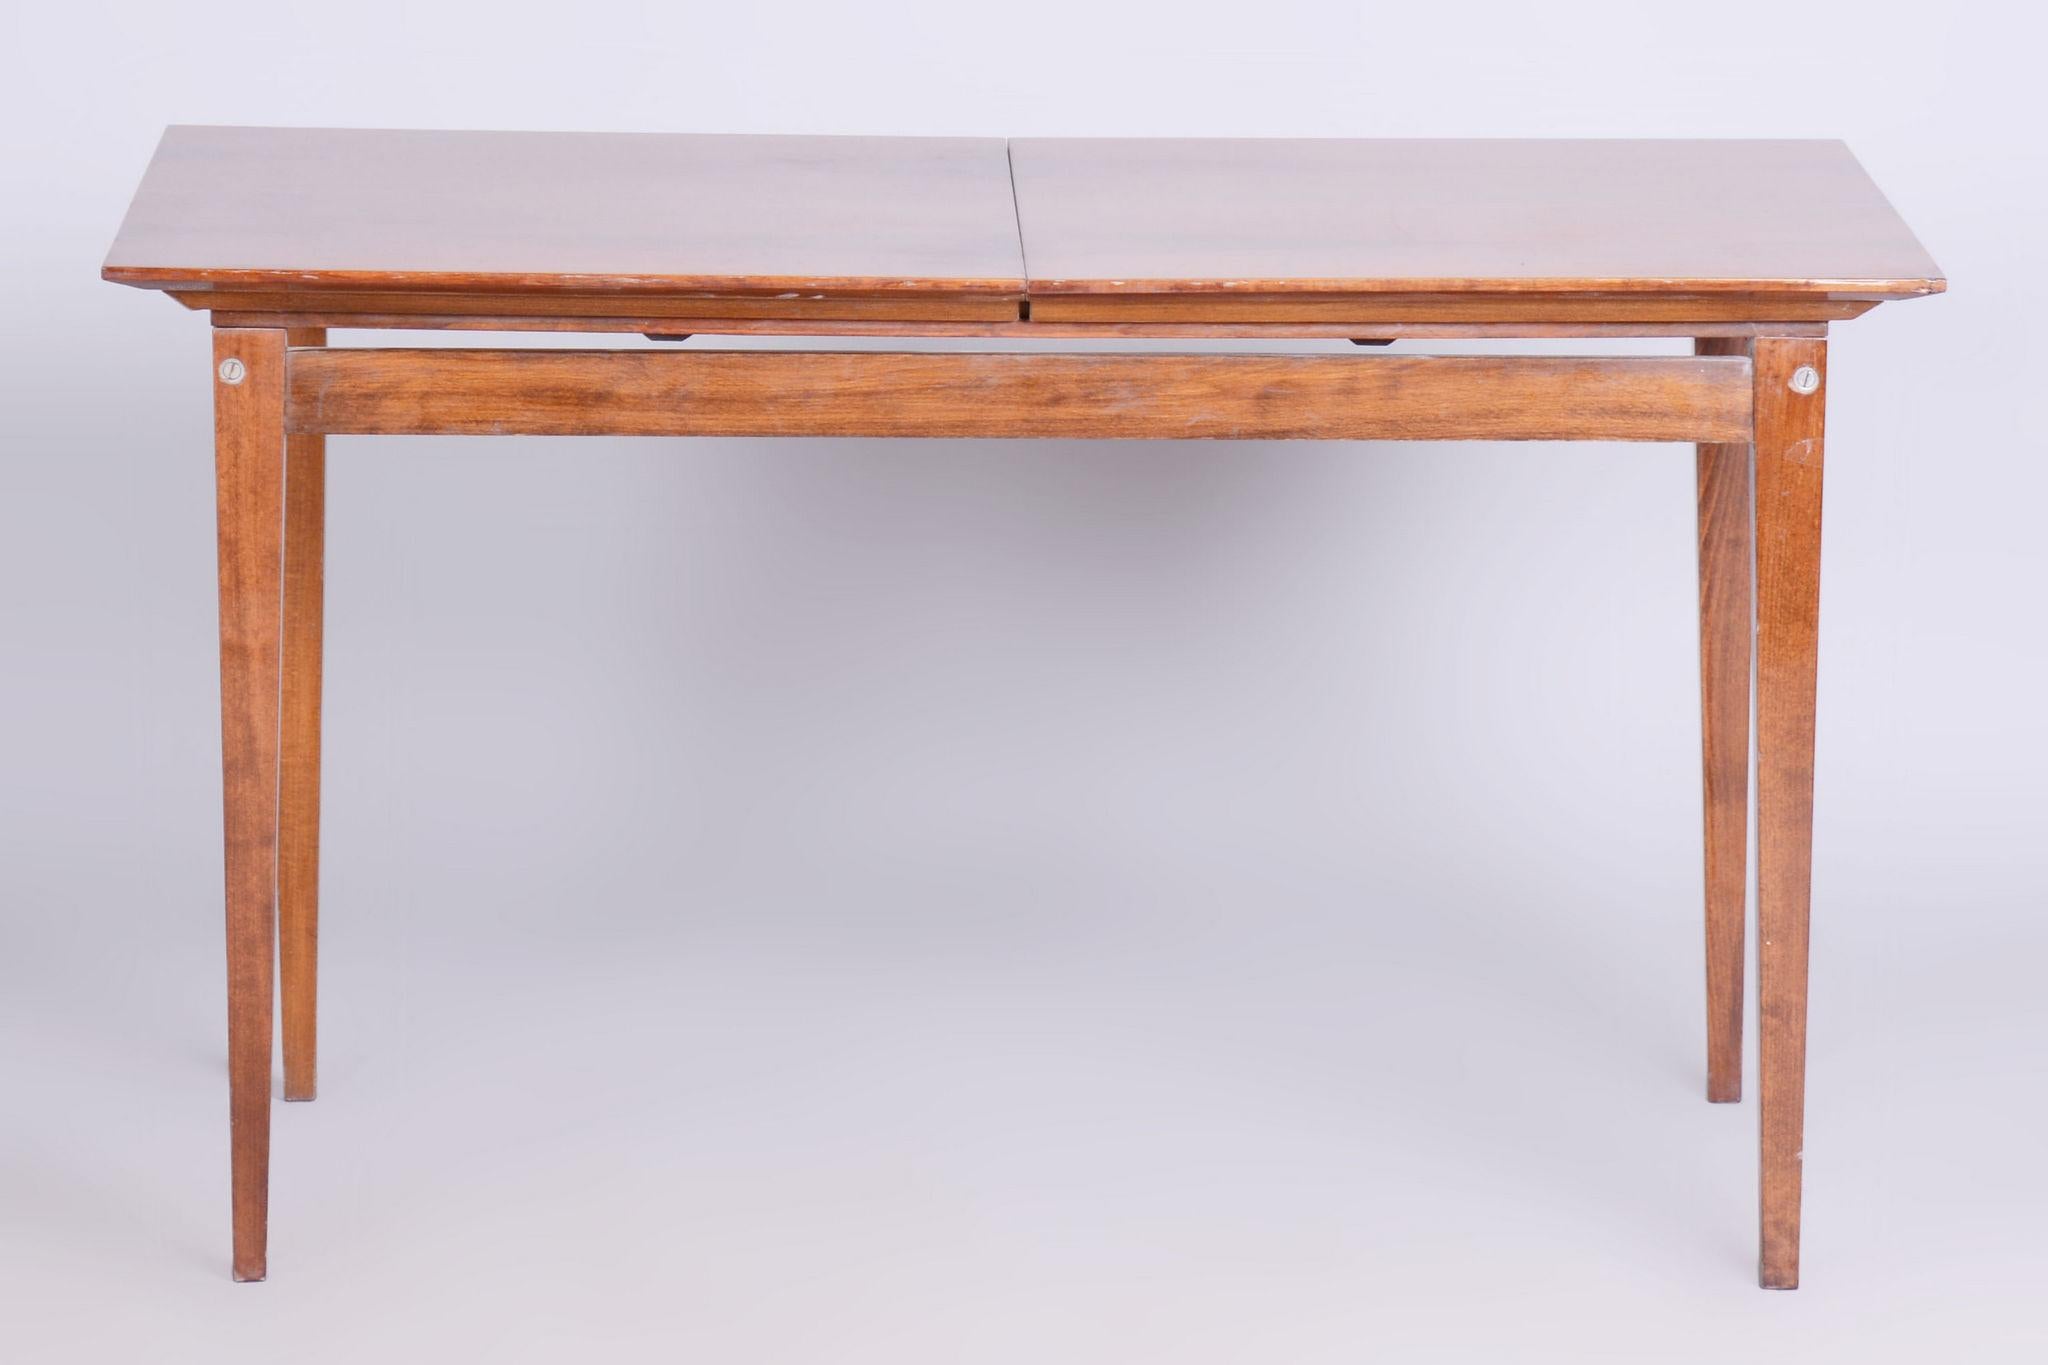 Original Mid-Century folding table.

Source: Czechoslovakia 
Period: 1950-1959
Material: Walnut
Maker: Mier Topolcany

The depth after unfolding is 180 cm. 

In pristine original condition, the item has been professionally cleaned, and its polish